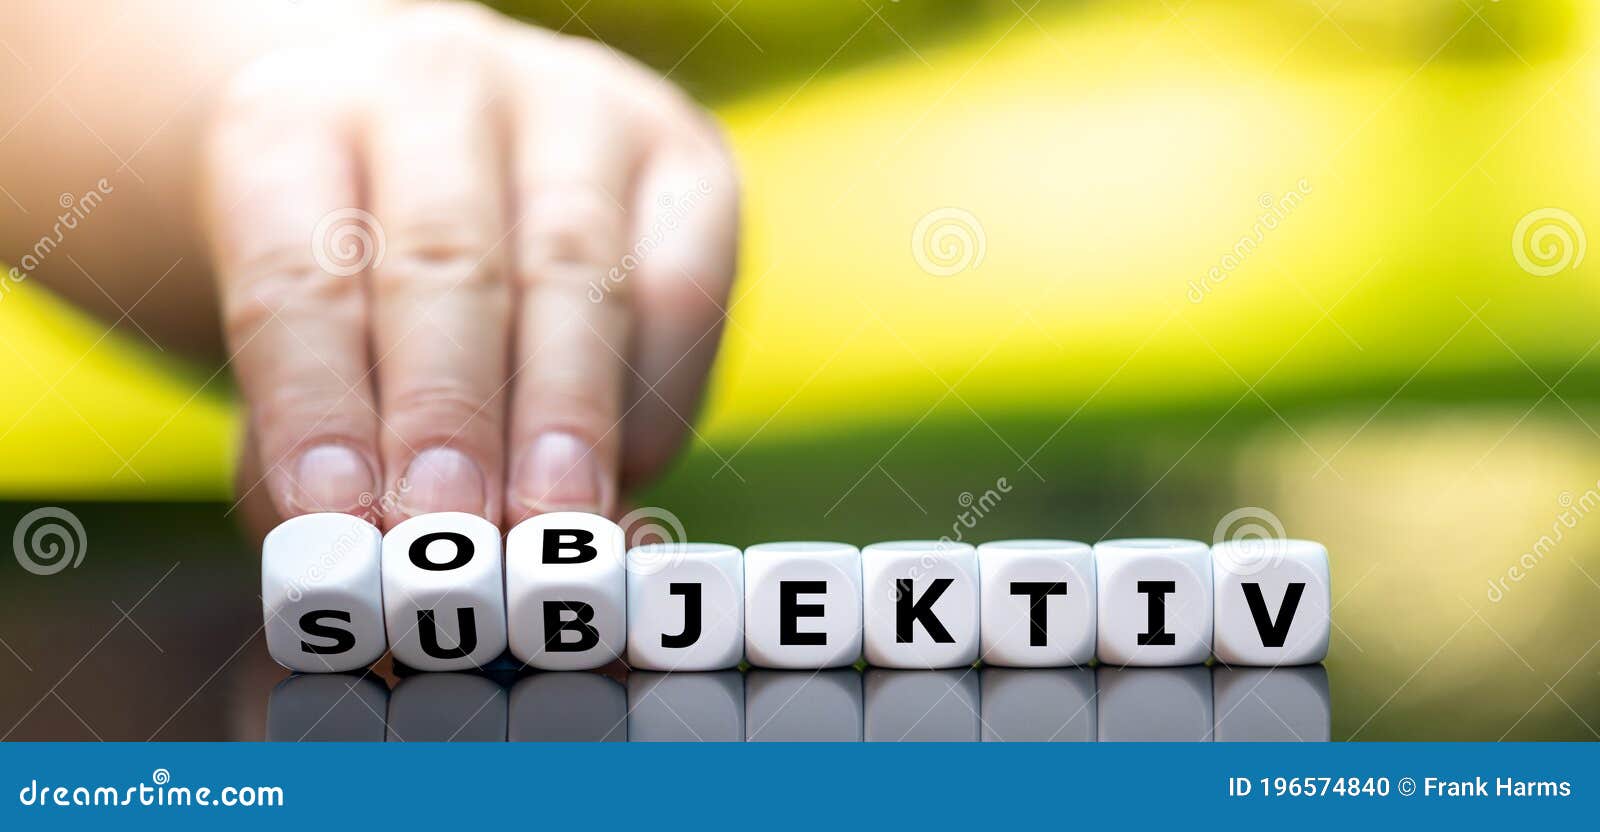 hand turns dice and changes the german word `subjektiv` subjective to `objektiv` objective.